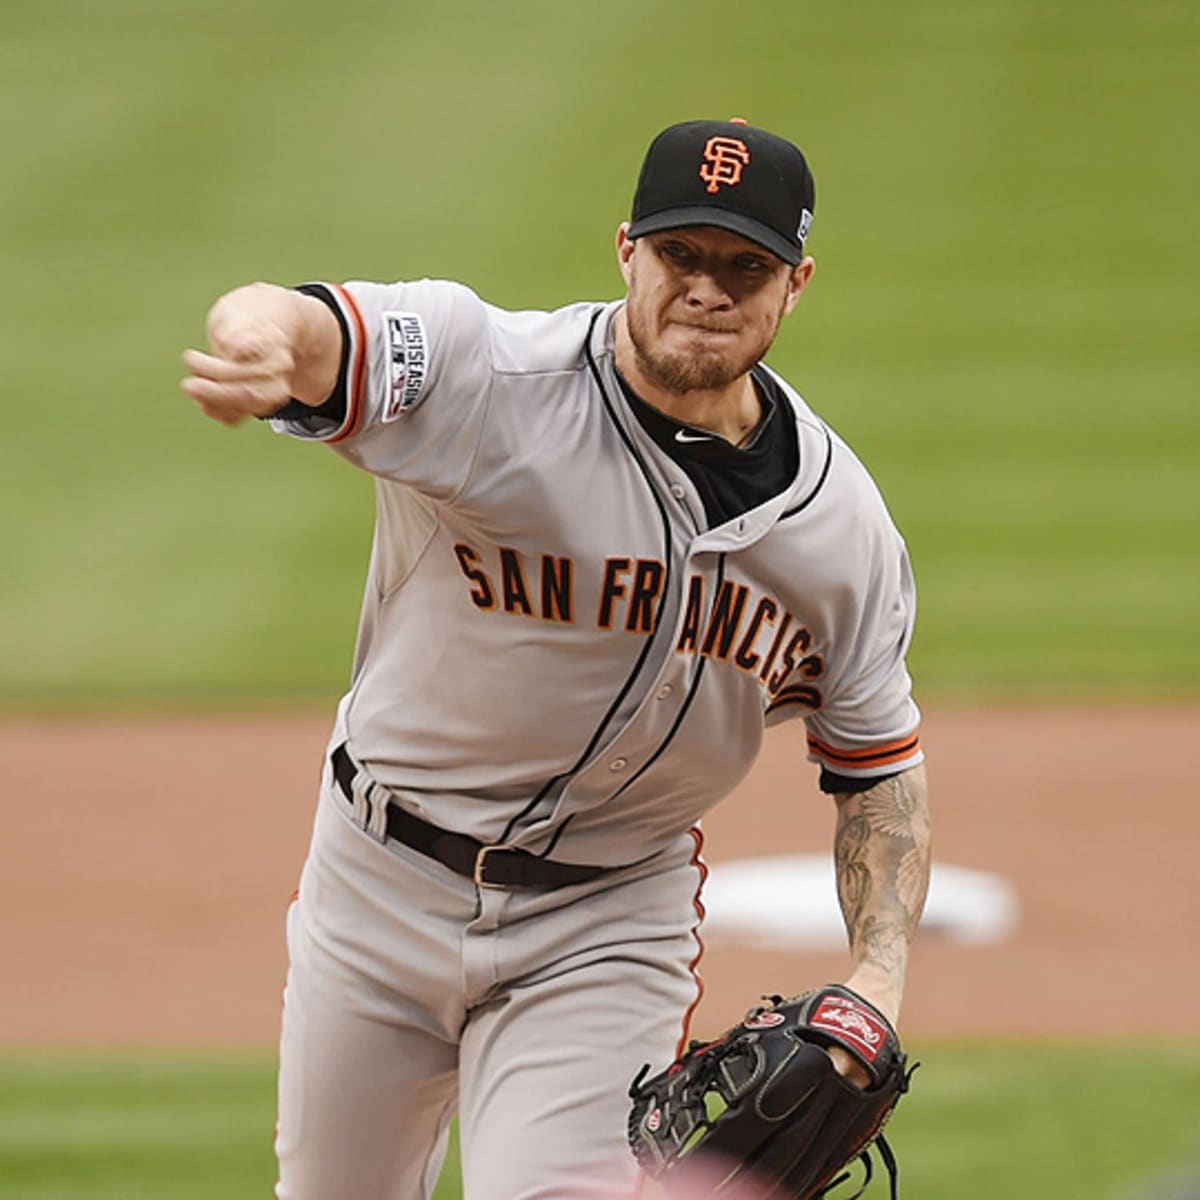 Jake Peavy's effective performance against the Nationals gives the